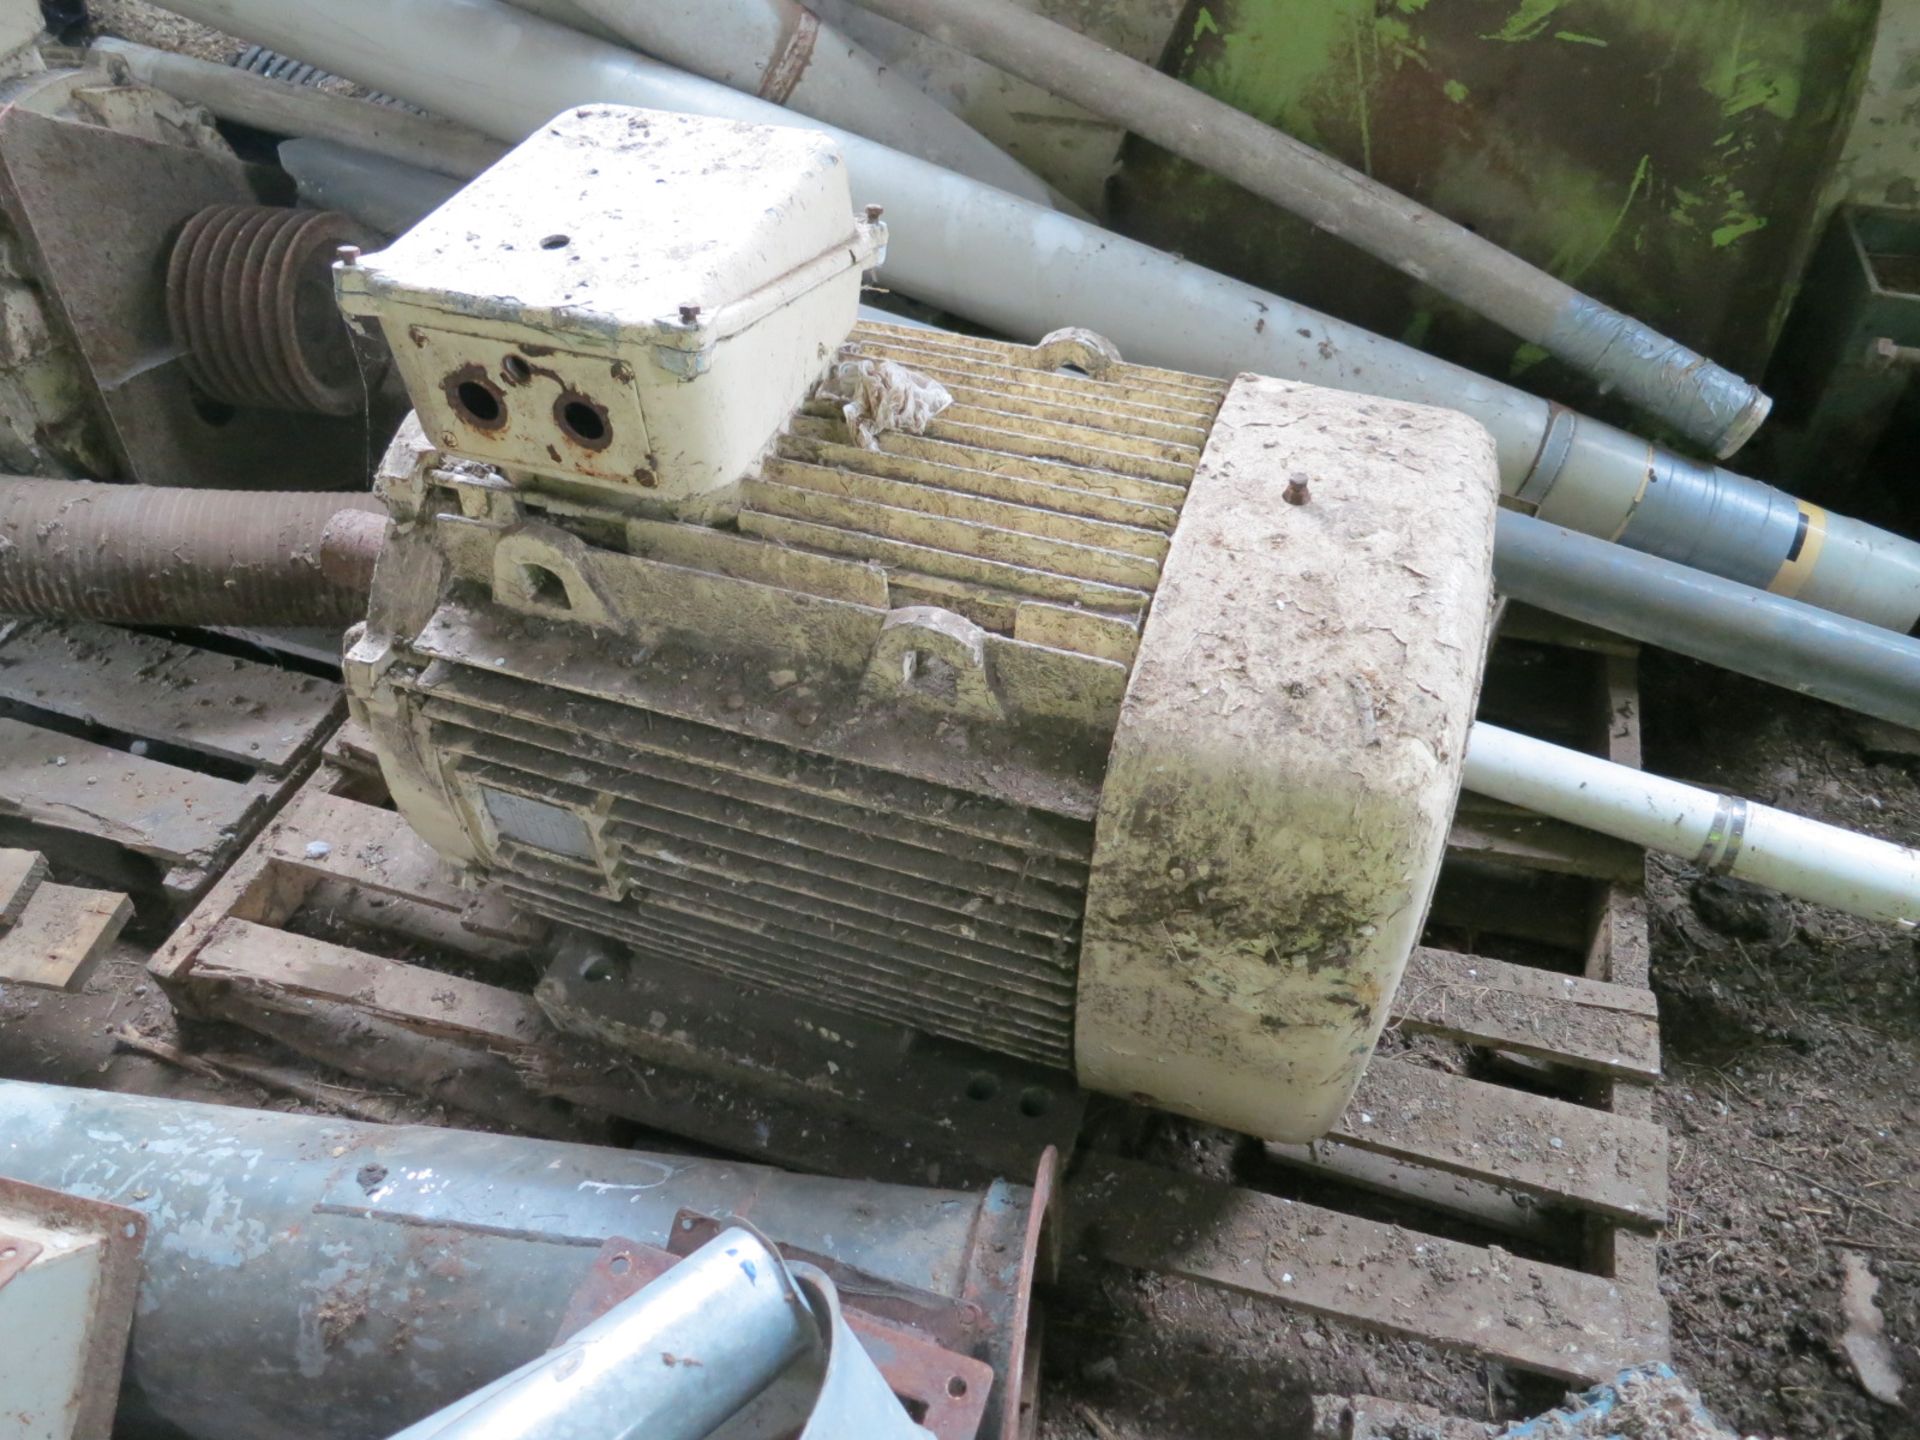 Motor - 110 kW 1490 rpm Foot Mounted TEFC Motor (2 remaining) (UCPE 5297) Price - £1,000 Please read